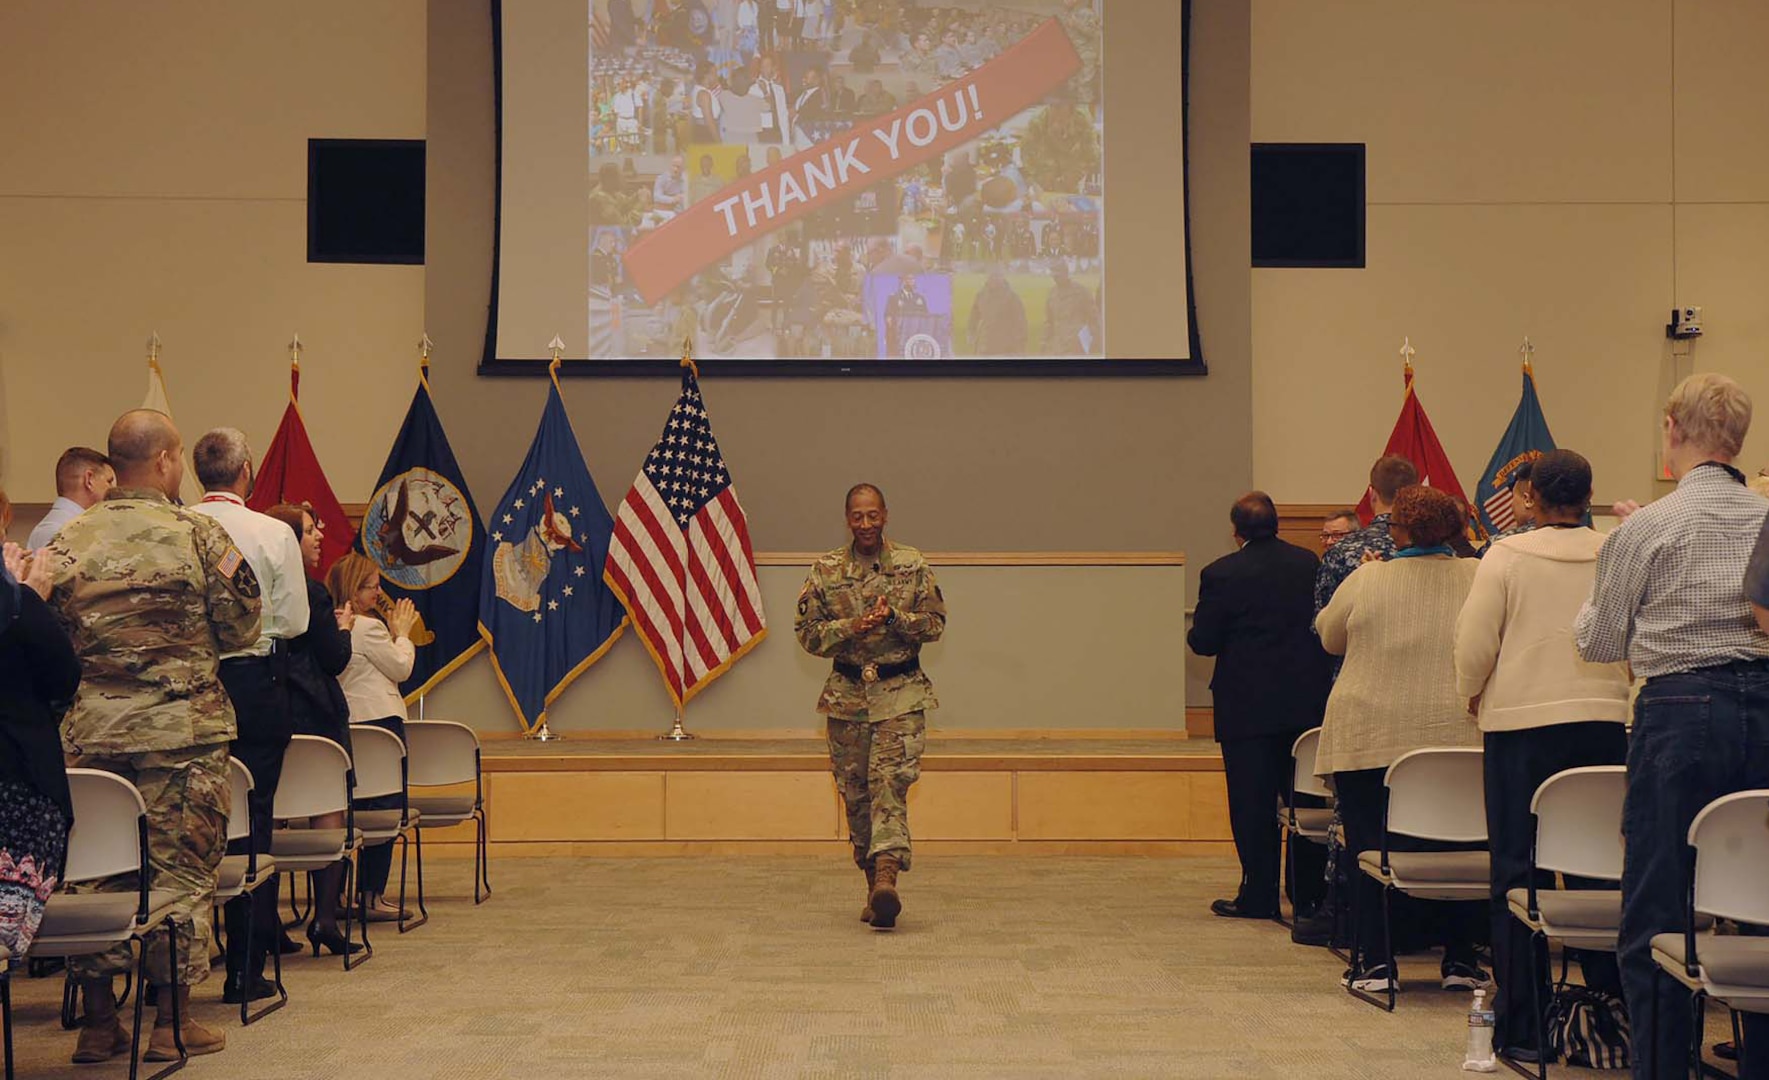 Army Brig. Gen. Charles Hamilton, DLA Troop Support commander, gets a standing ovation at the conclusion of his final workforce town hall June 20. Earlier, he played a video in which customers from around the world thanked Troop Support employees for their support.